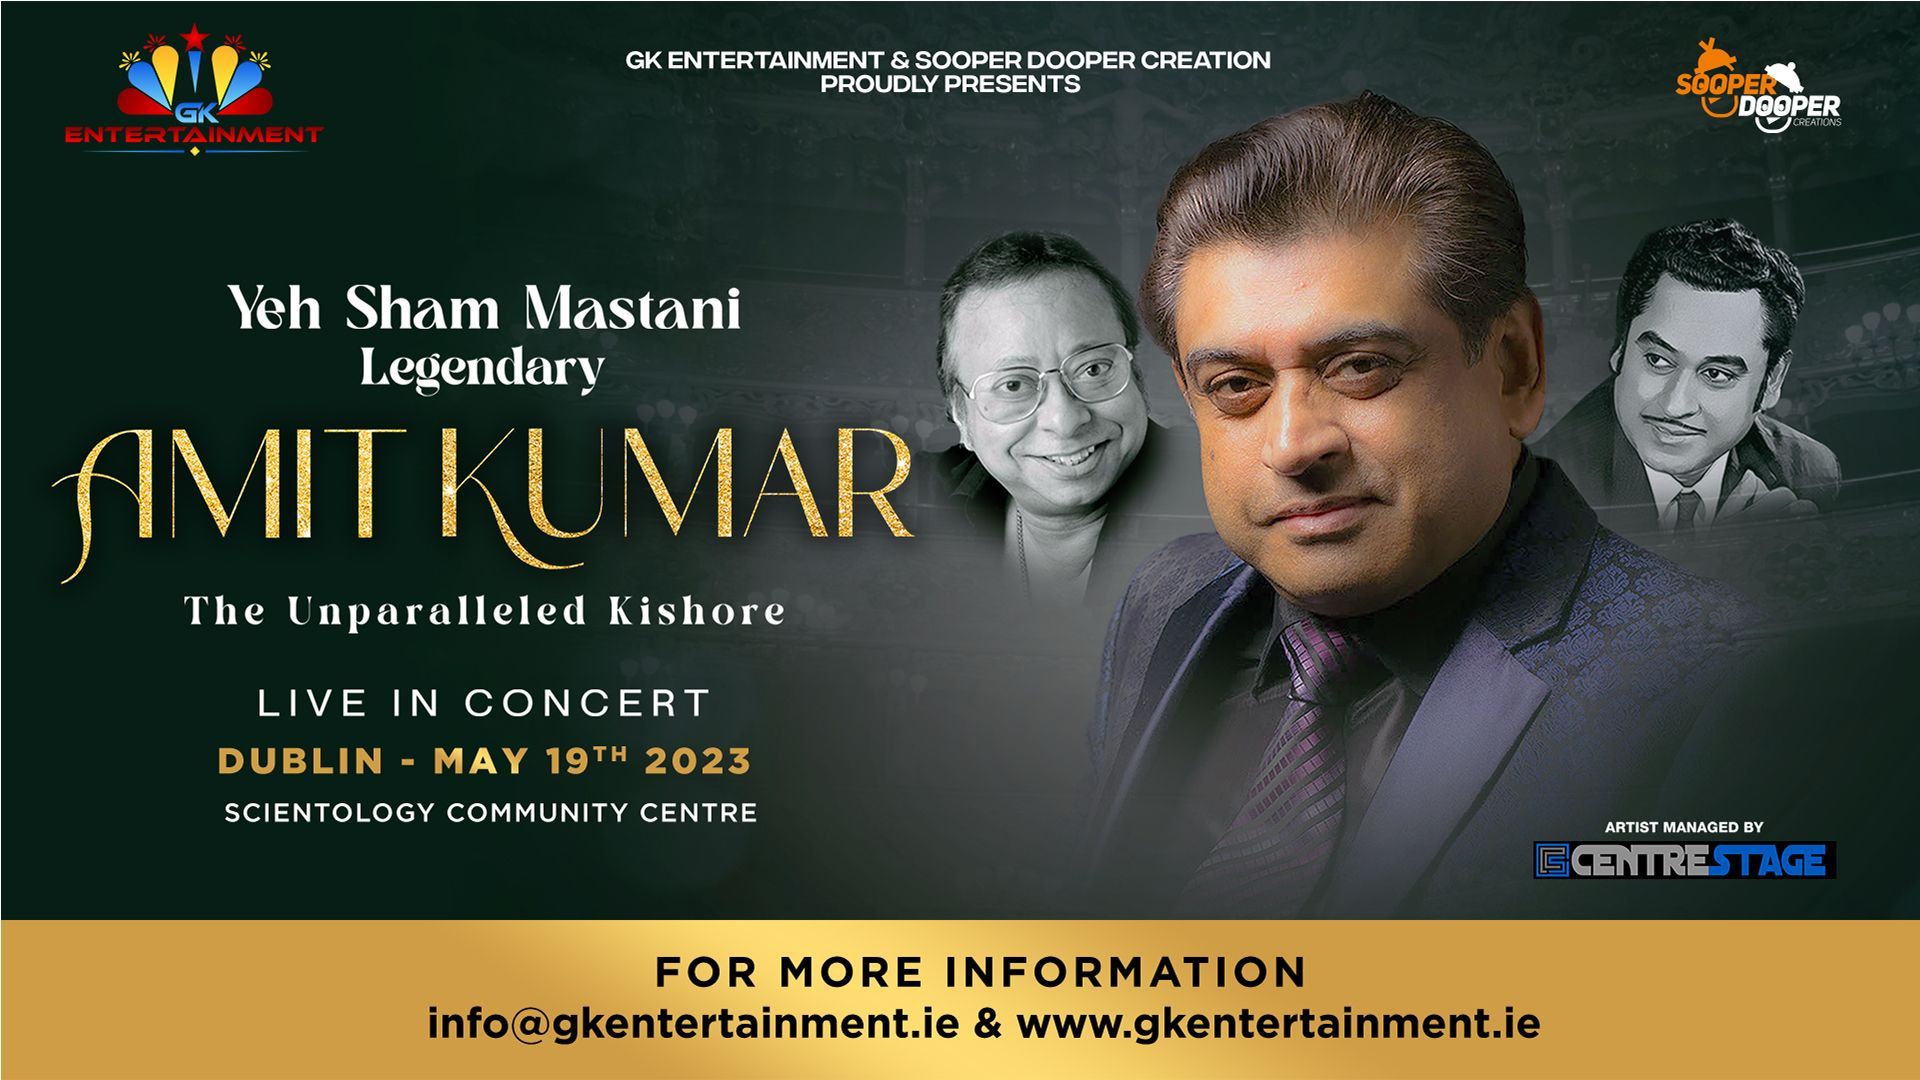 Image of Amit Kumar's concert poster featuring his name, date, time, and venue of the concert in Dub